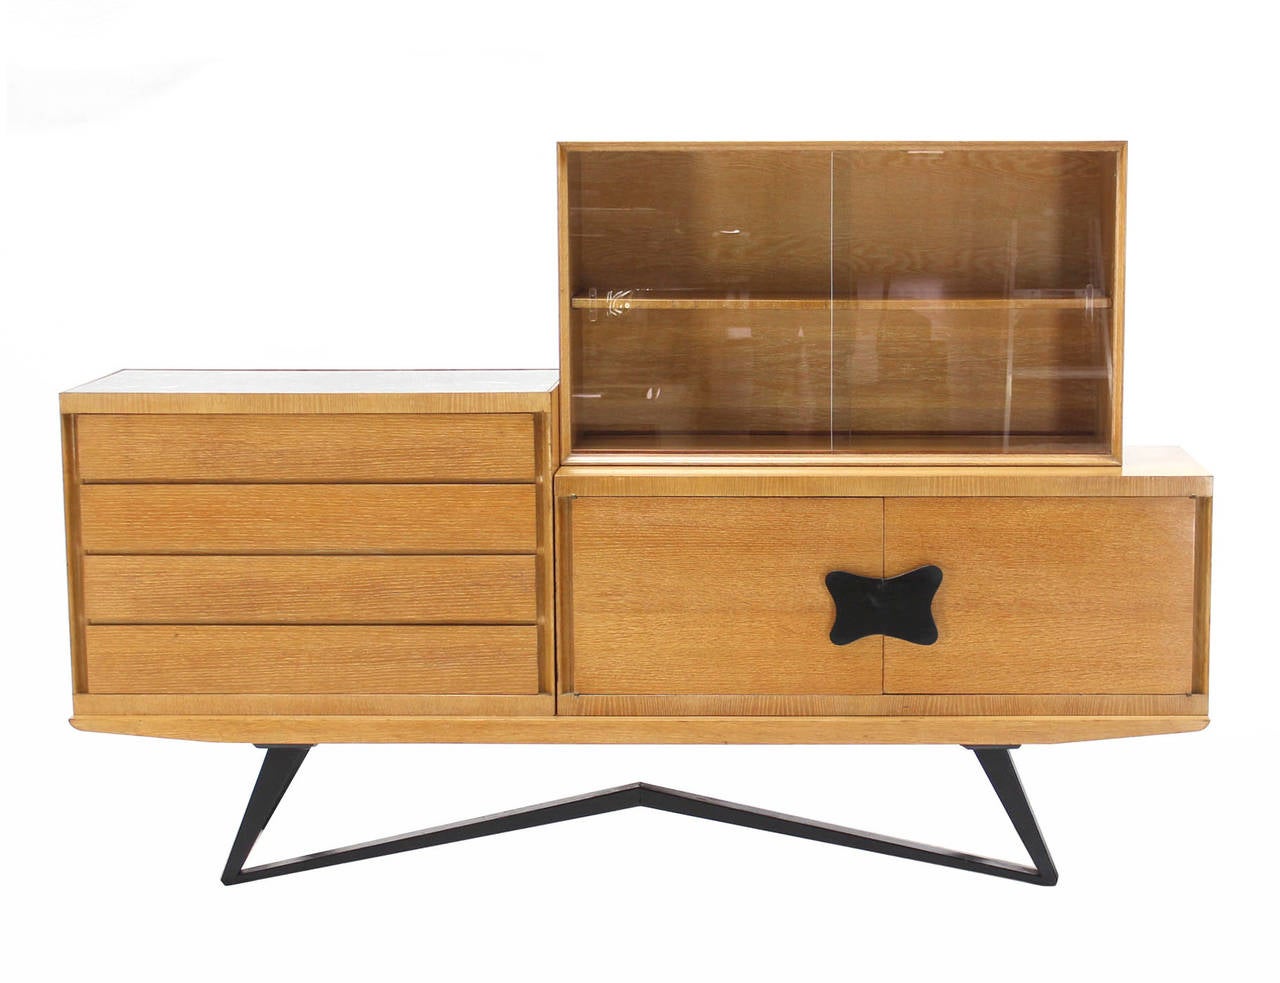 Mid century modern reconfigurable crused oak finish credenza. There are total 3 cabinets and the bench platform bench with bow tie shape legs. Sliding glass doors bookcase compartment. Multifunction credenza with lots  of display possibilities. 